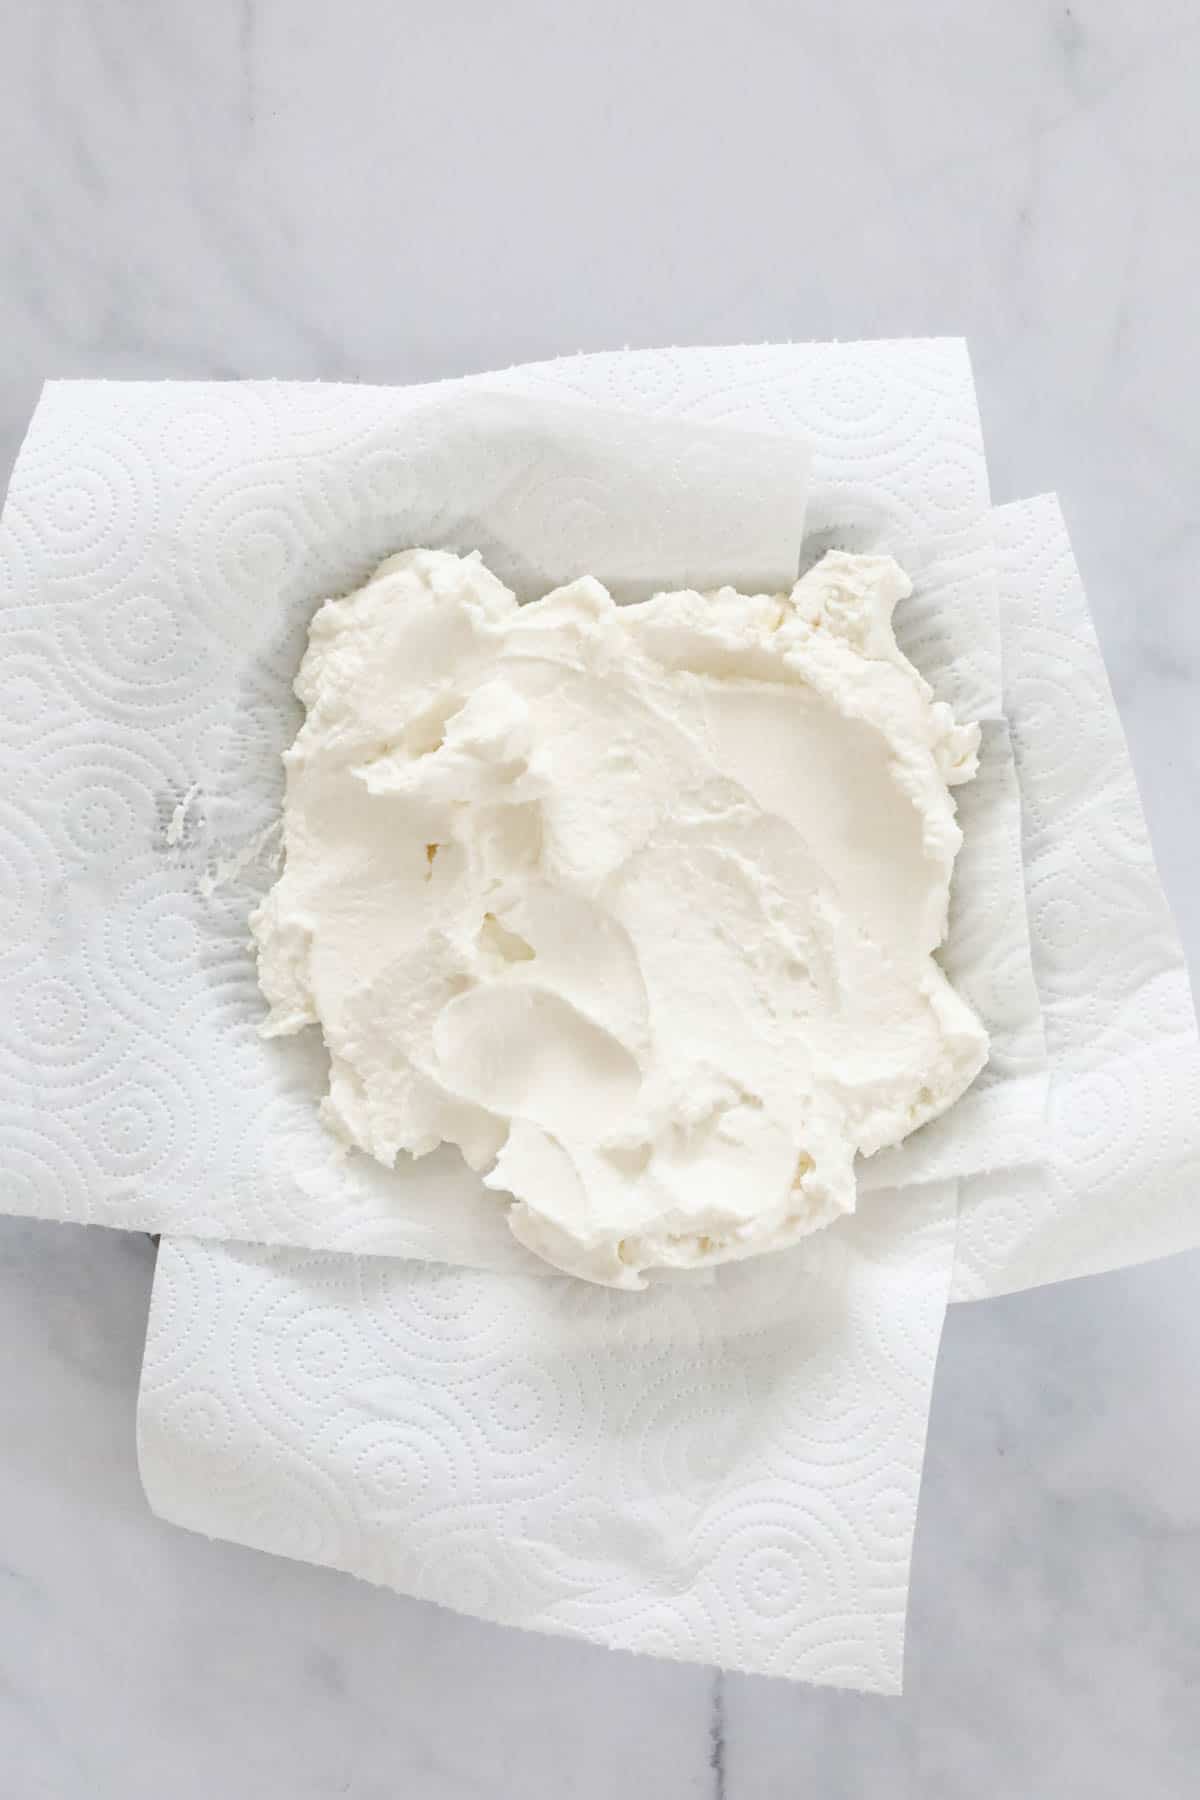 Fresh ricotta placed on paper towels to drain.